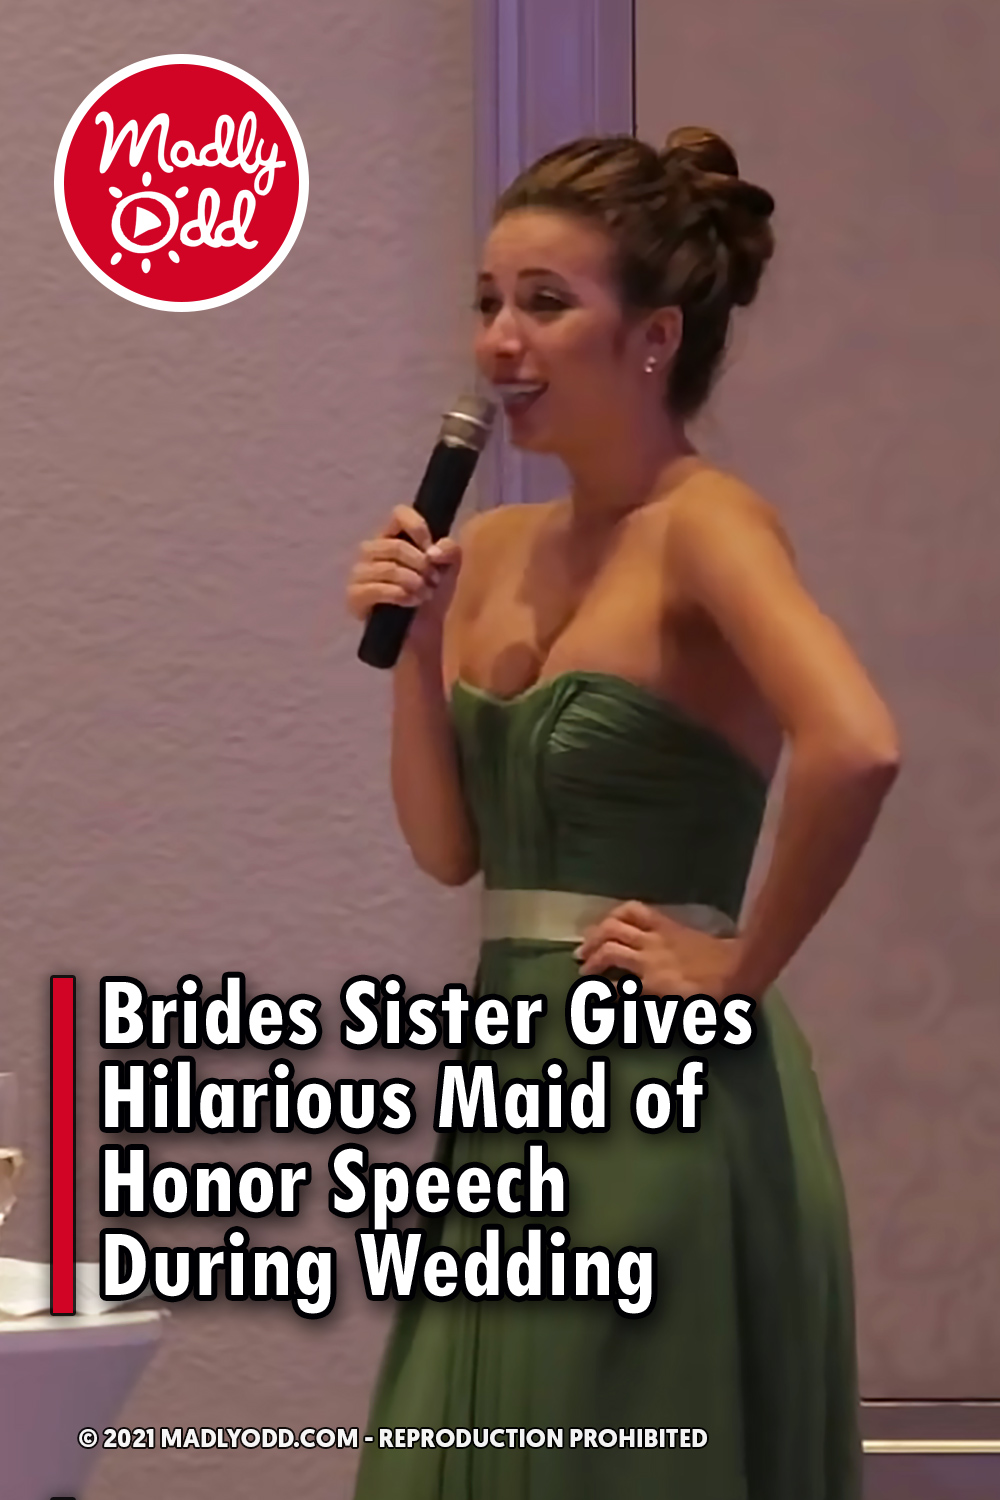 Brides Sister Gives Hilarious Maid of Honor Speech During Wedding